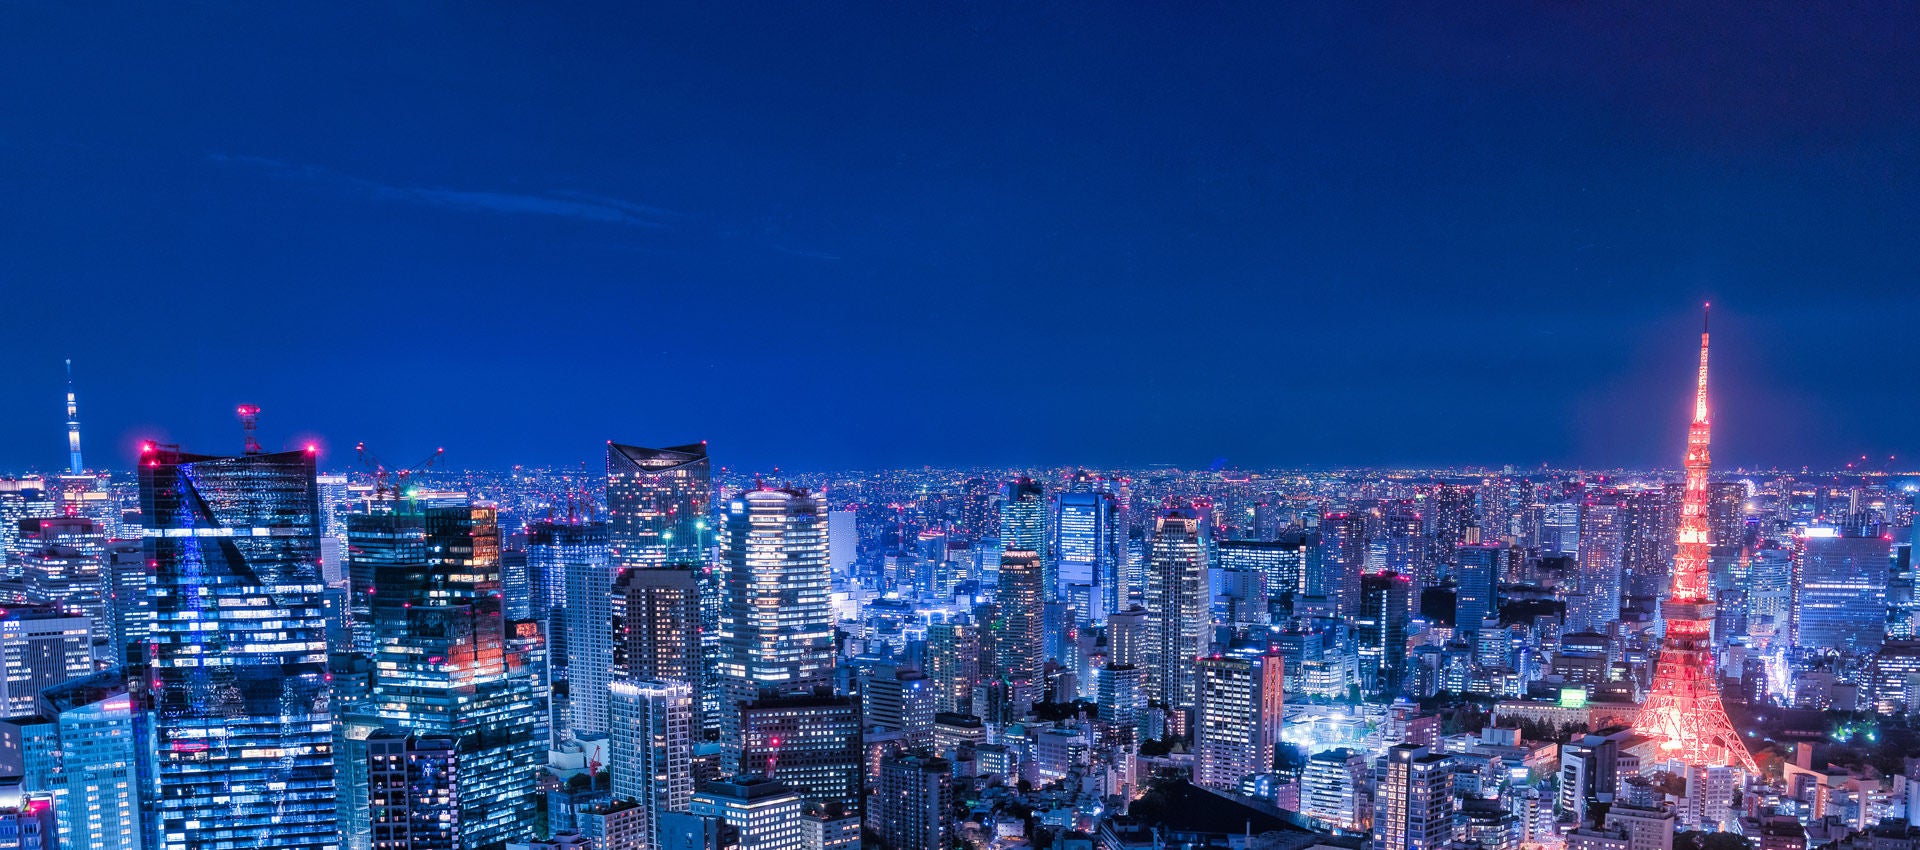 The Tokyo skyline lights up against a clear evening sky.